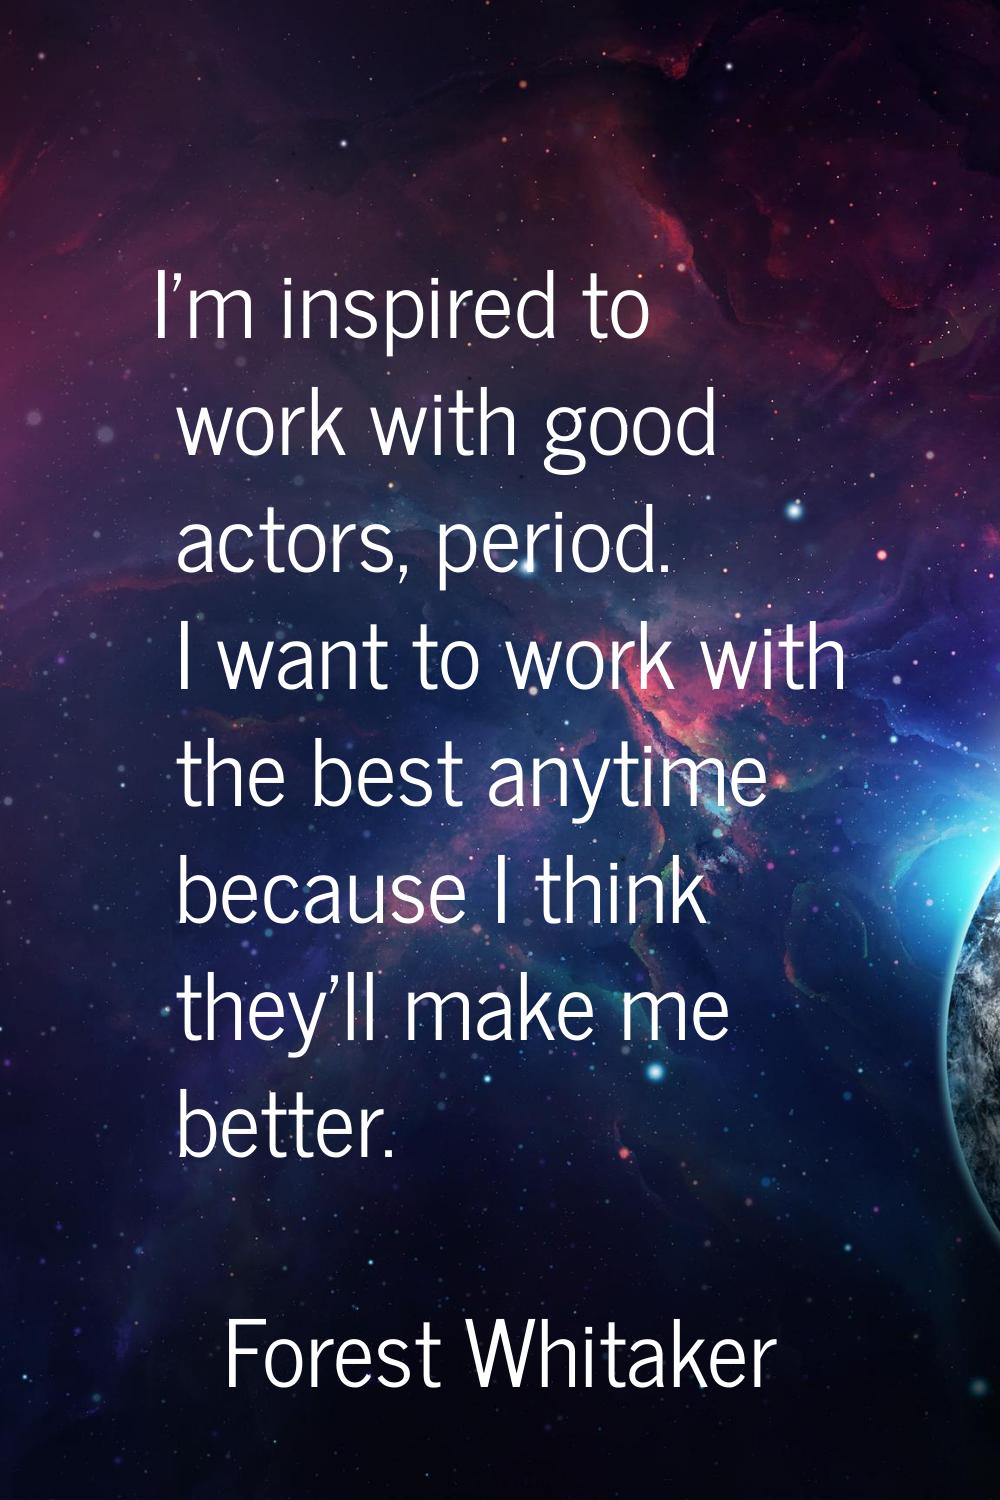 I'm inspired to work with good actors, period. I want to work with the best anytime because I think